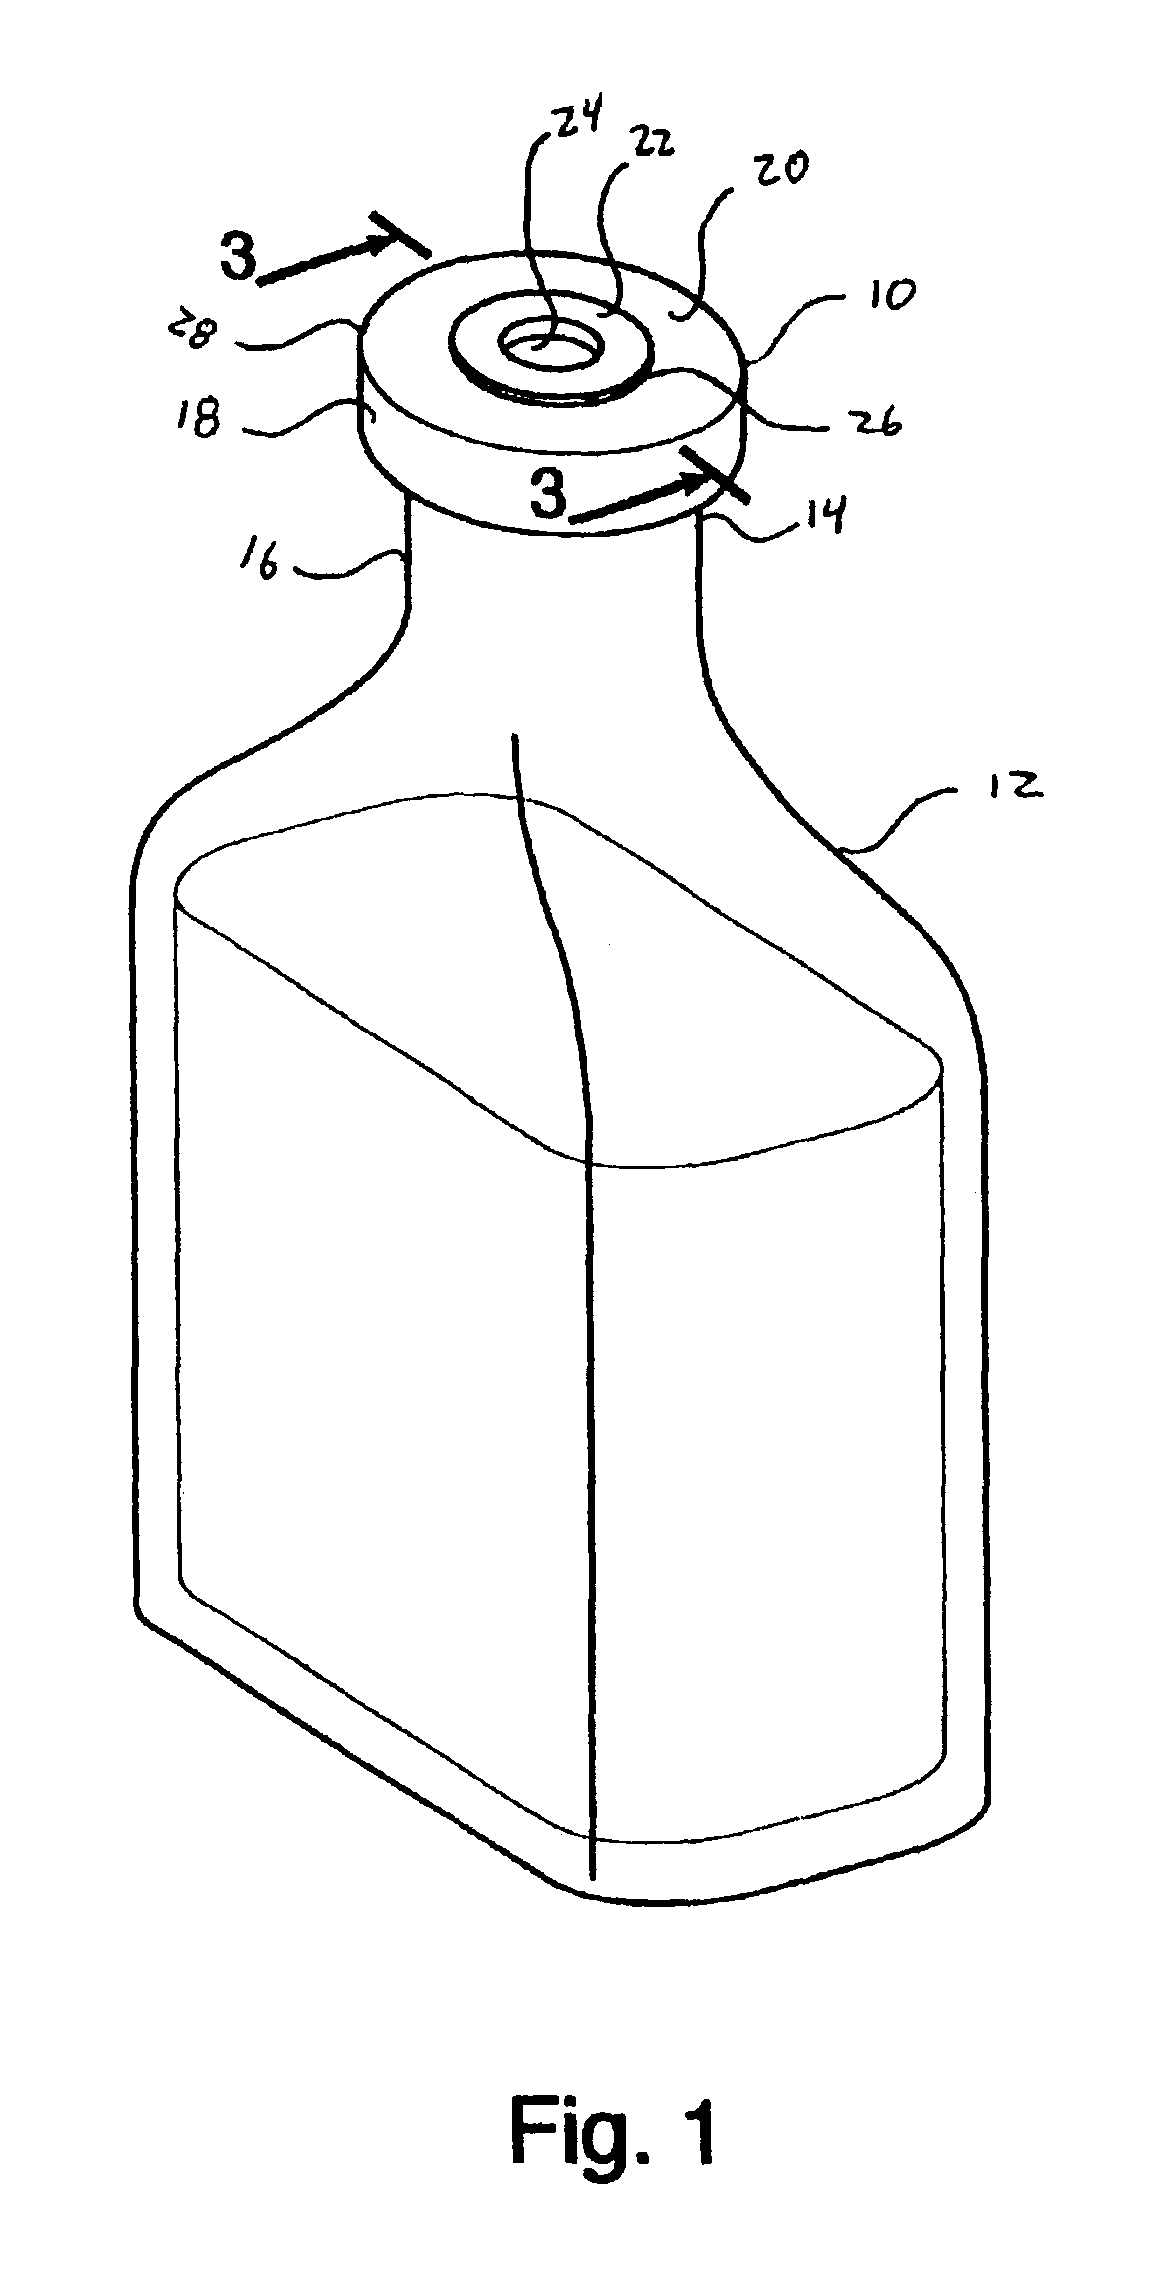 Orifice reducer for container neck